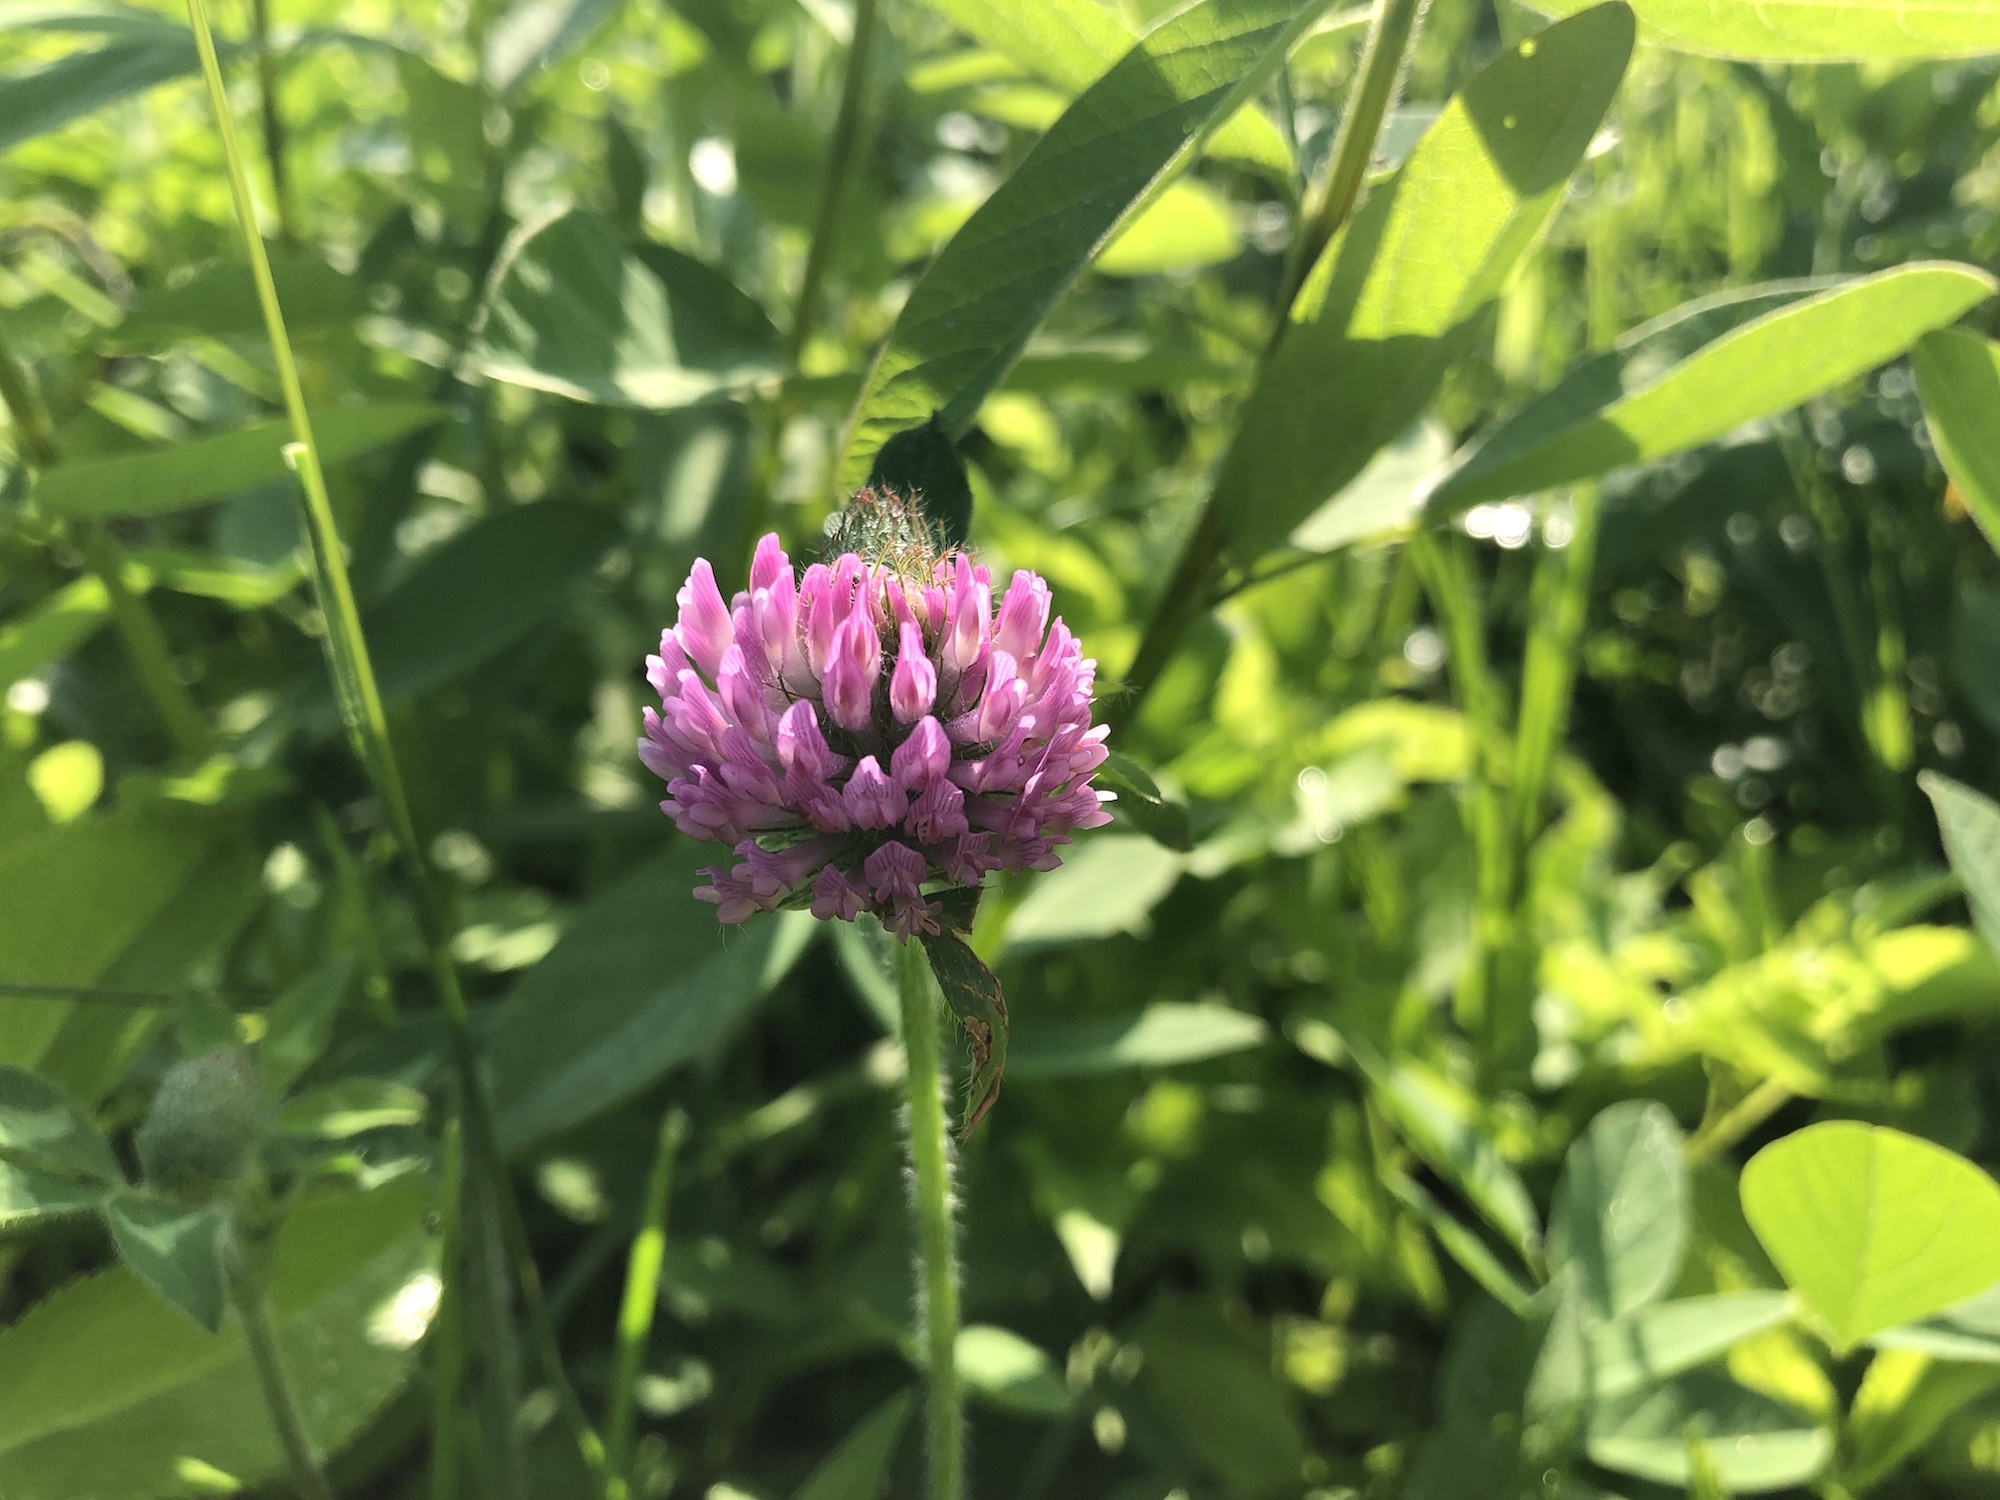 Red Clover on bank of retaining pond at the corner of Manitou Way and Nakoma Road in Madison, Wisconsin on June 6, 2019.